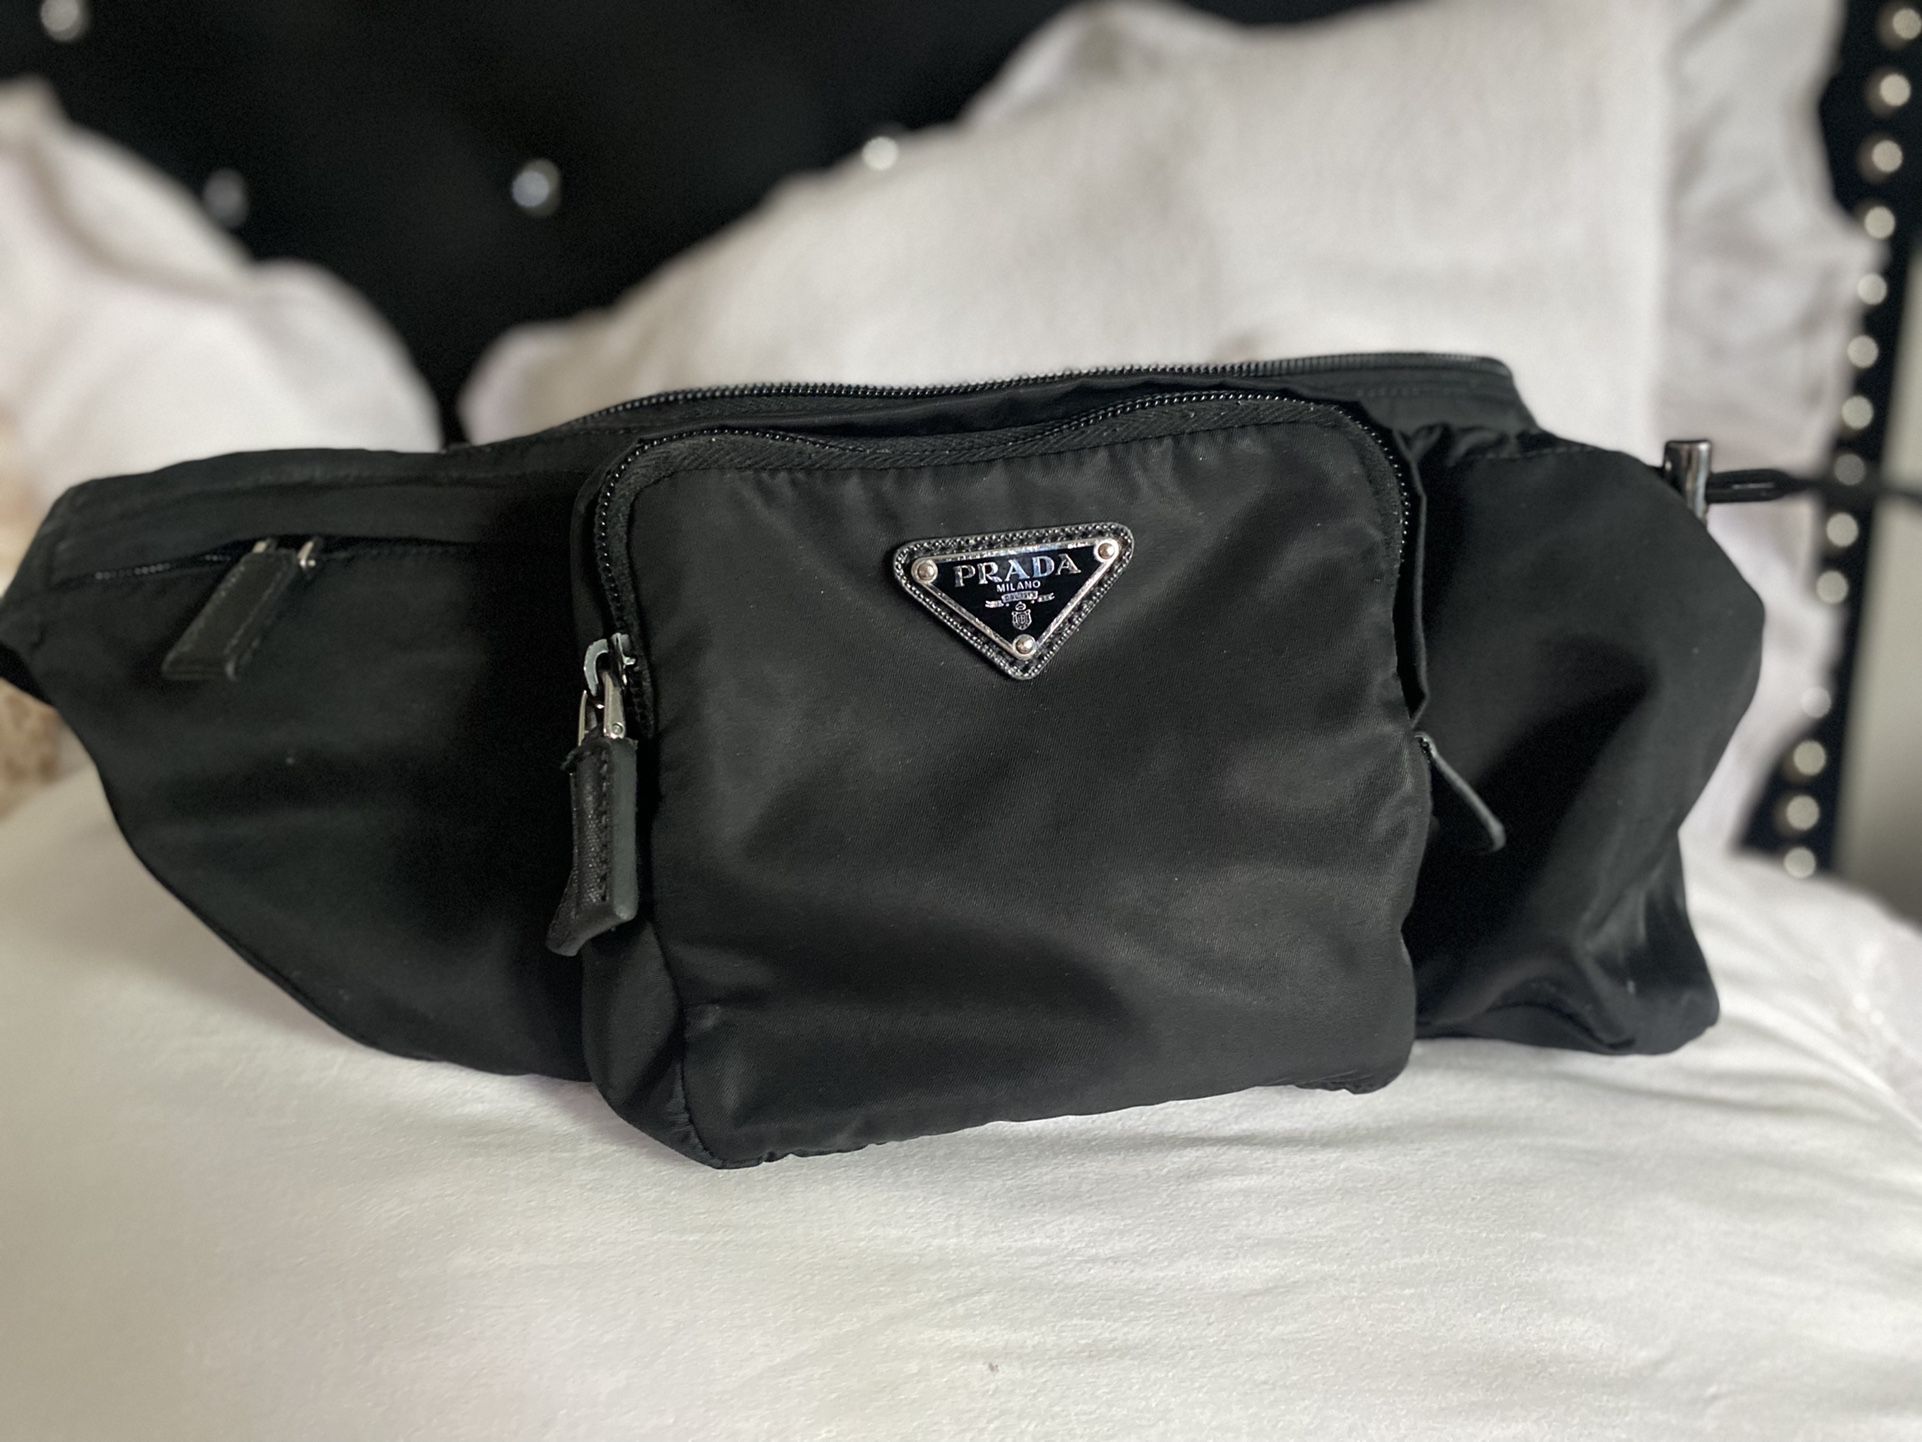 PRADA “AUTHENTIC “ Fanny Pack for Sale in Henderson, NV - OfferUp